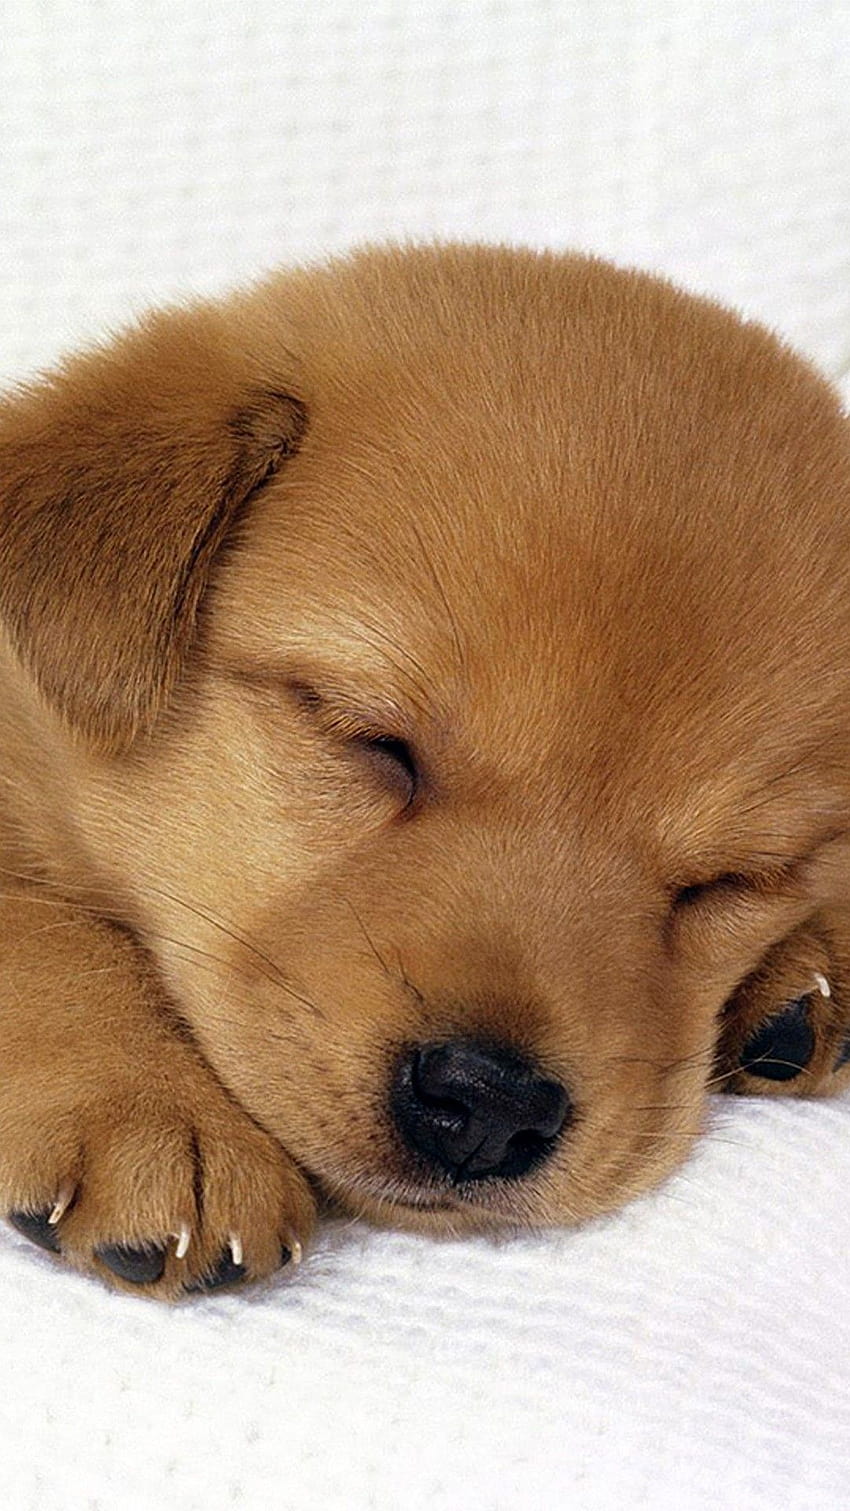 A sleeping brown puppy on a white background - Puppy